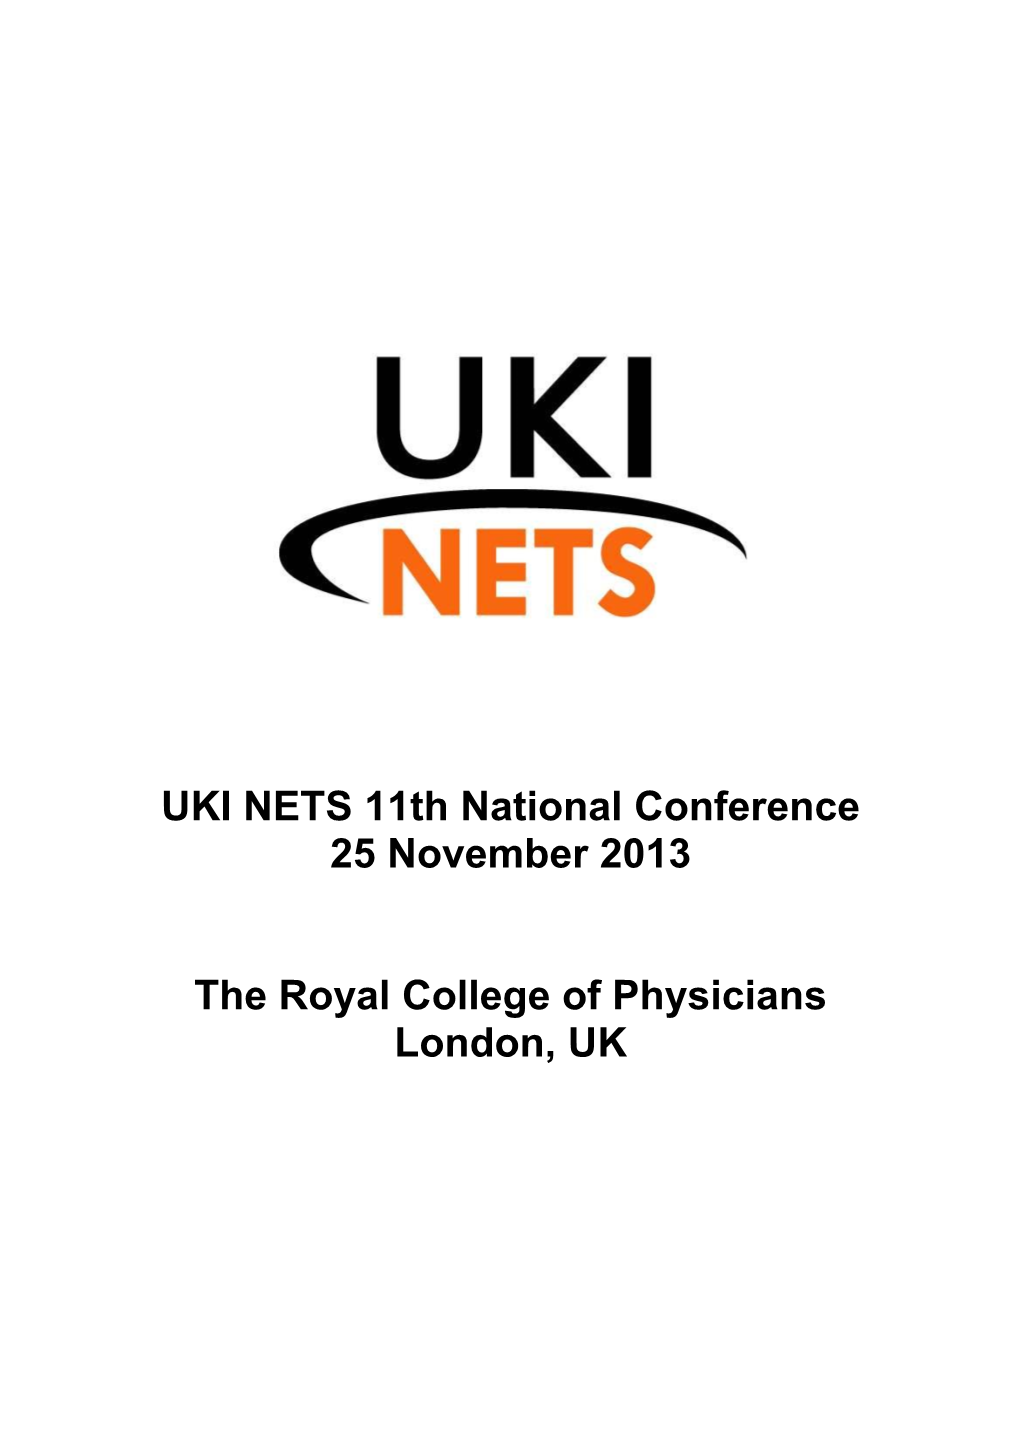 UKI NETS 11Th National Conference 25 November 2013 the Royal College of Physicians London, UK